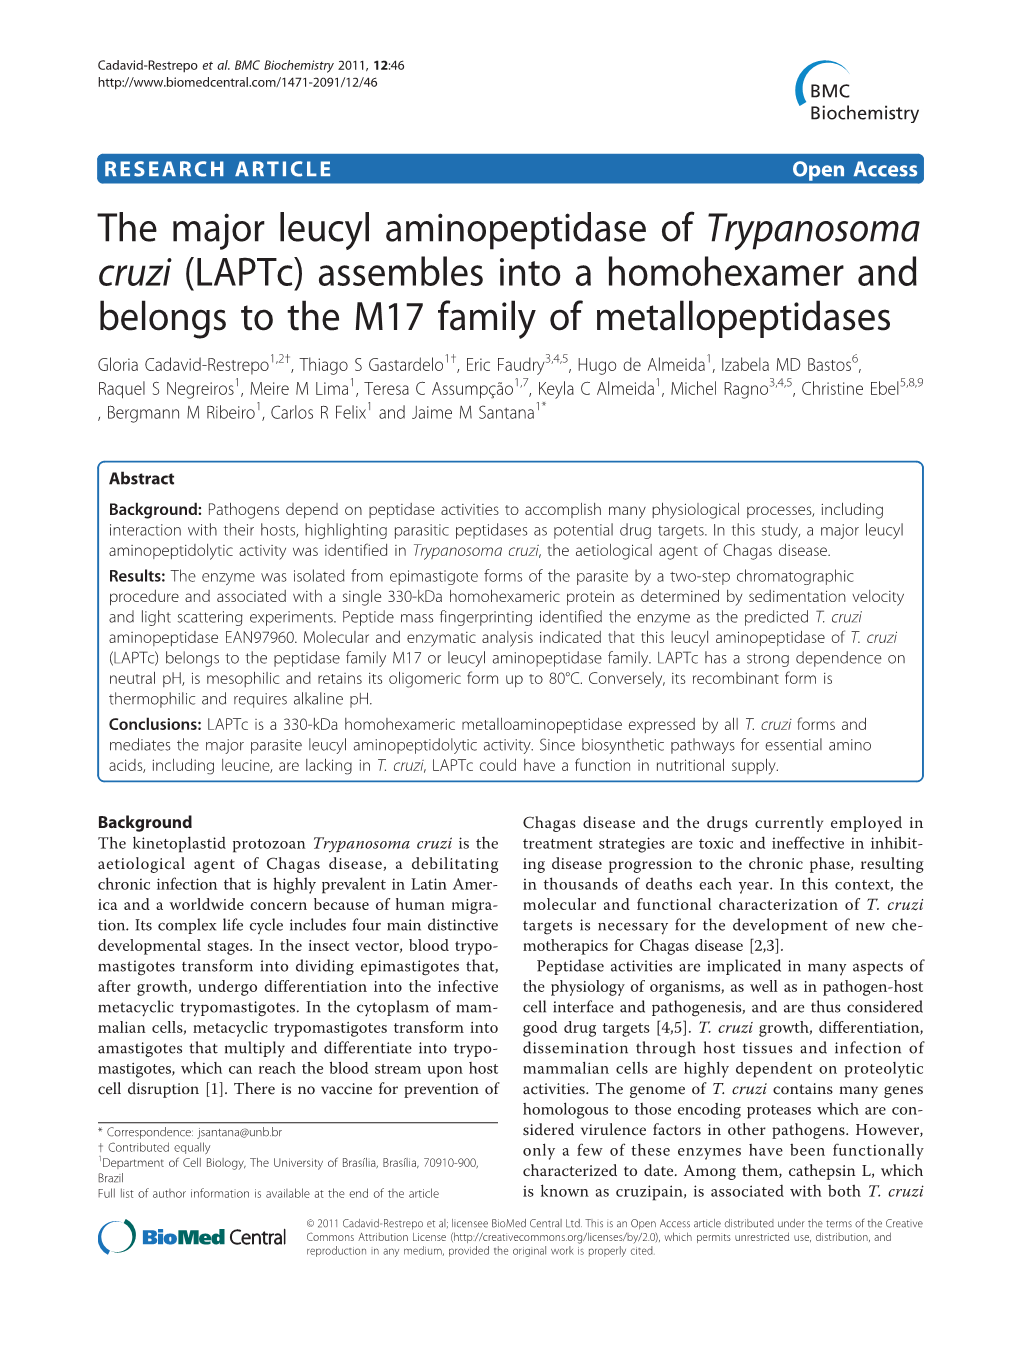 The Major Leucyl Aminopeptidase of Trypanosoma Cruzi (Laptc) Assembles Into a Homohexamer and Belongs to the M17 Family of Metal